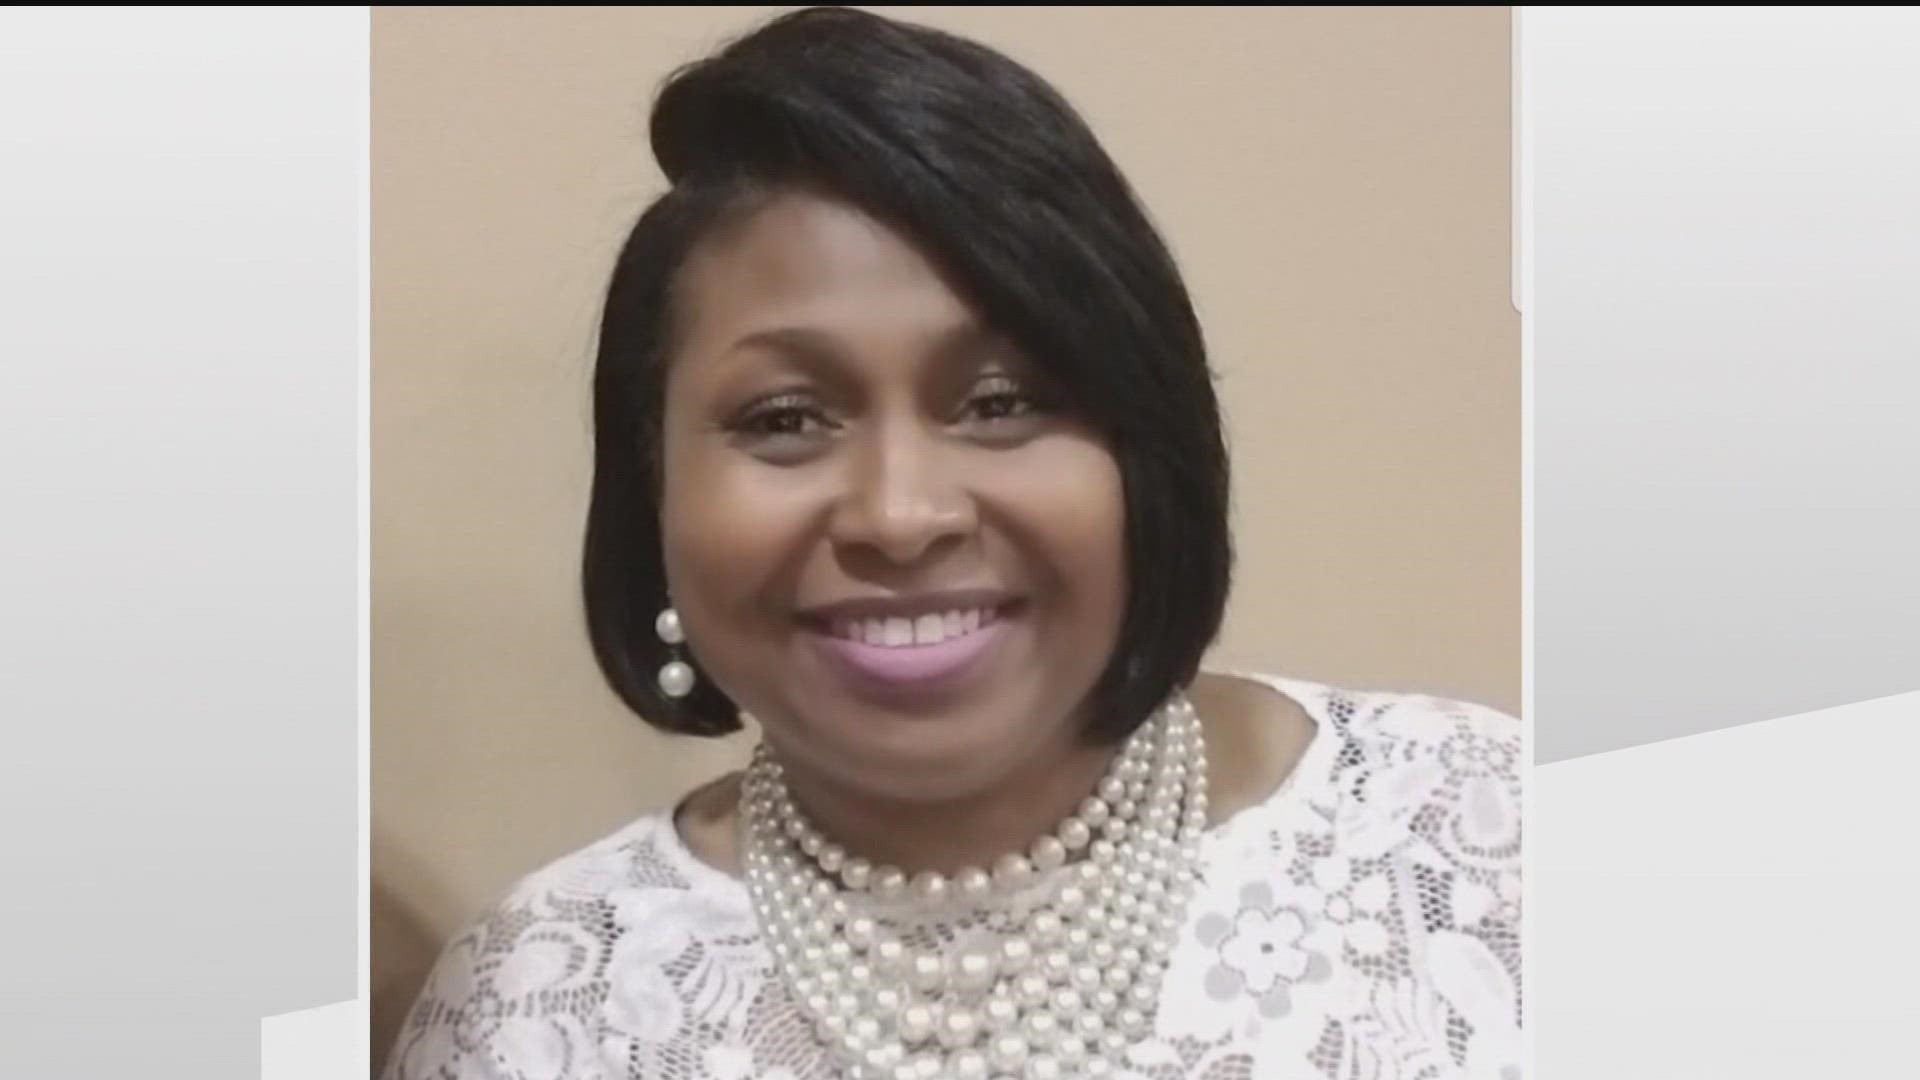 DeKalb County Police are investigating the pastor's wife as a homicide, they said.